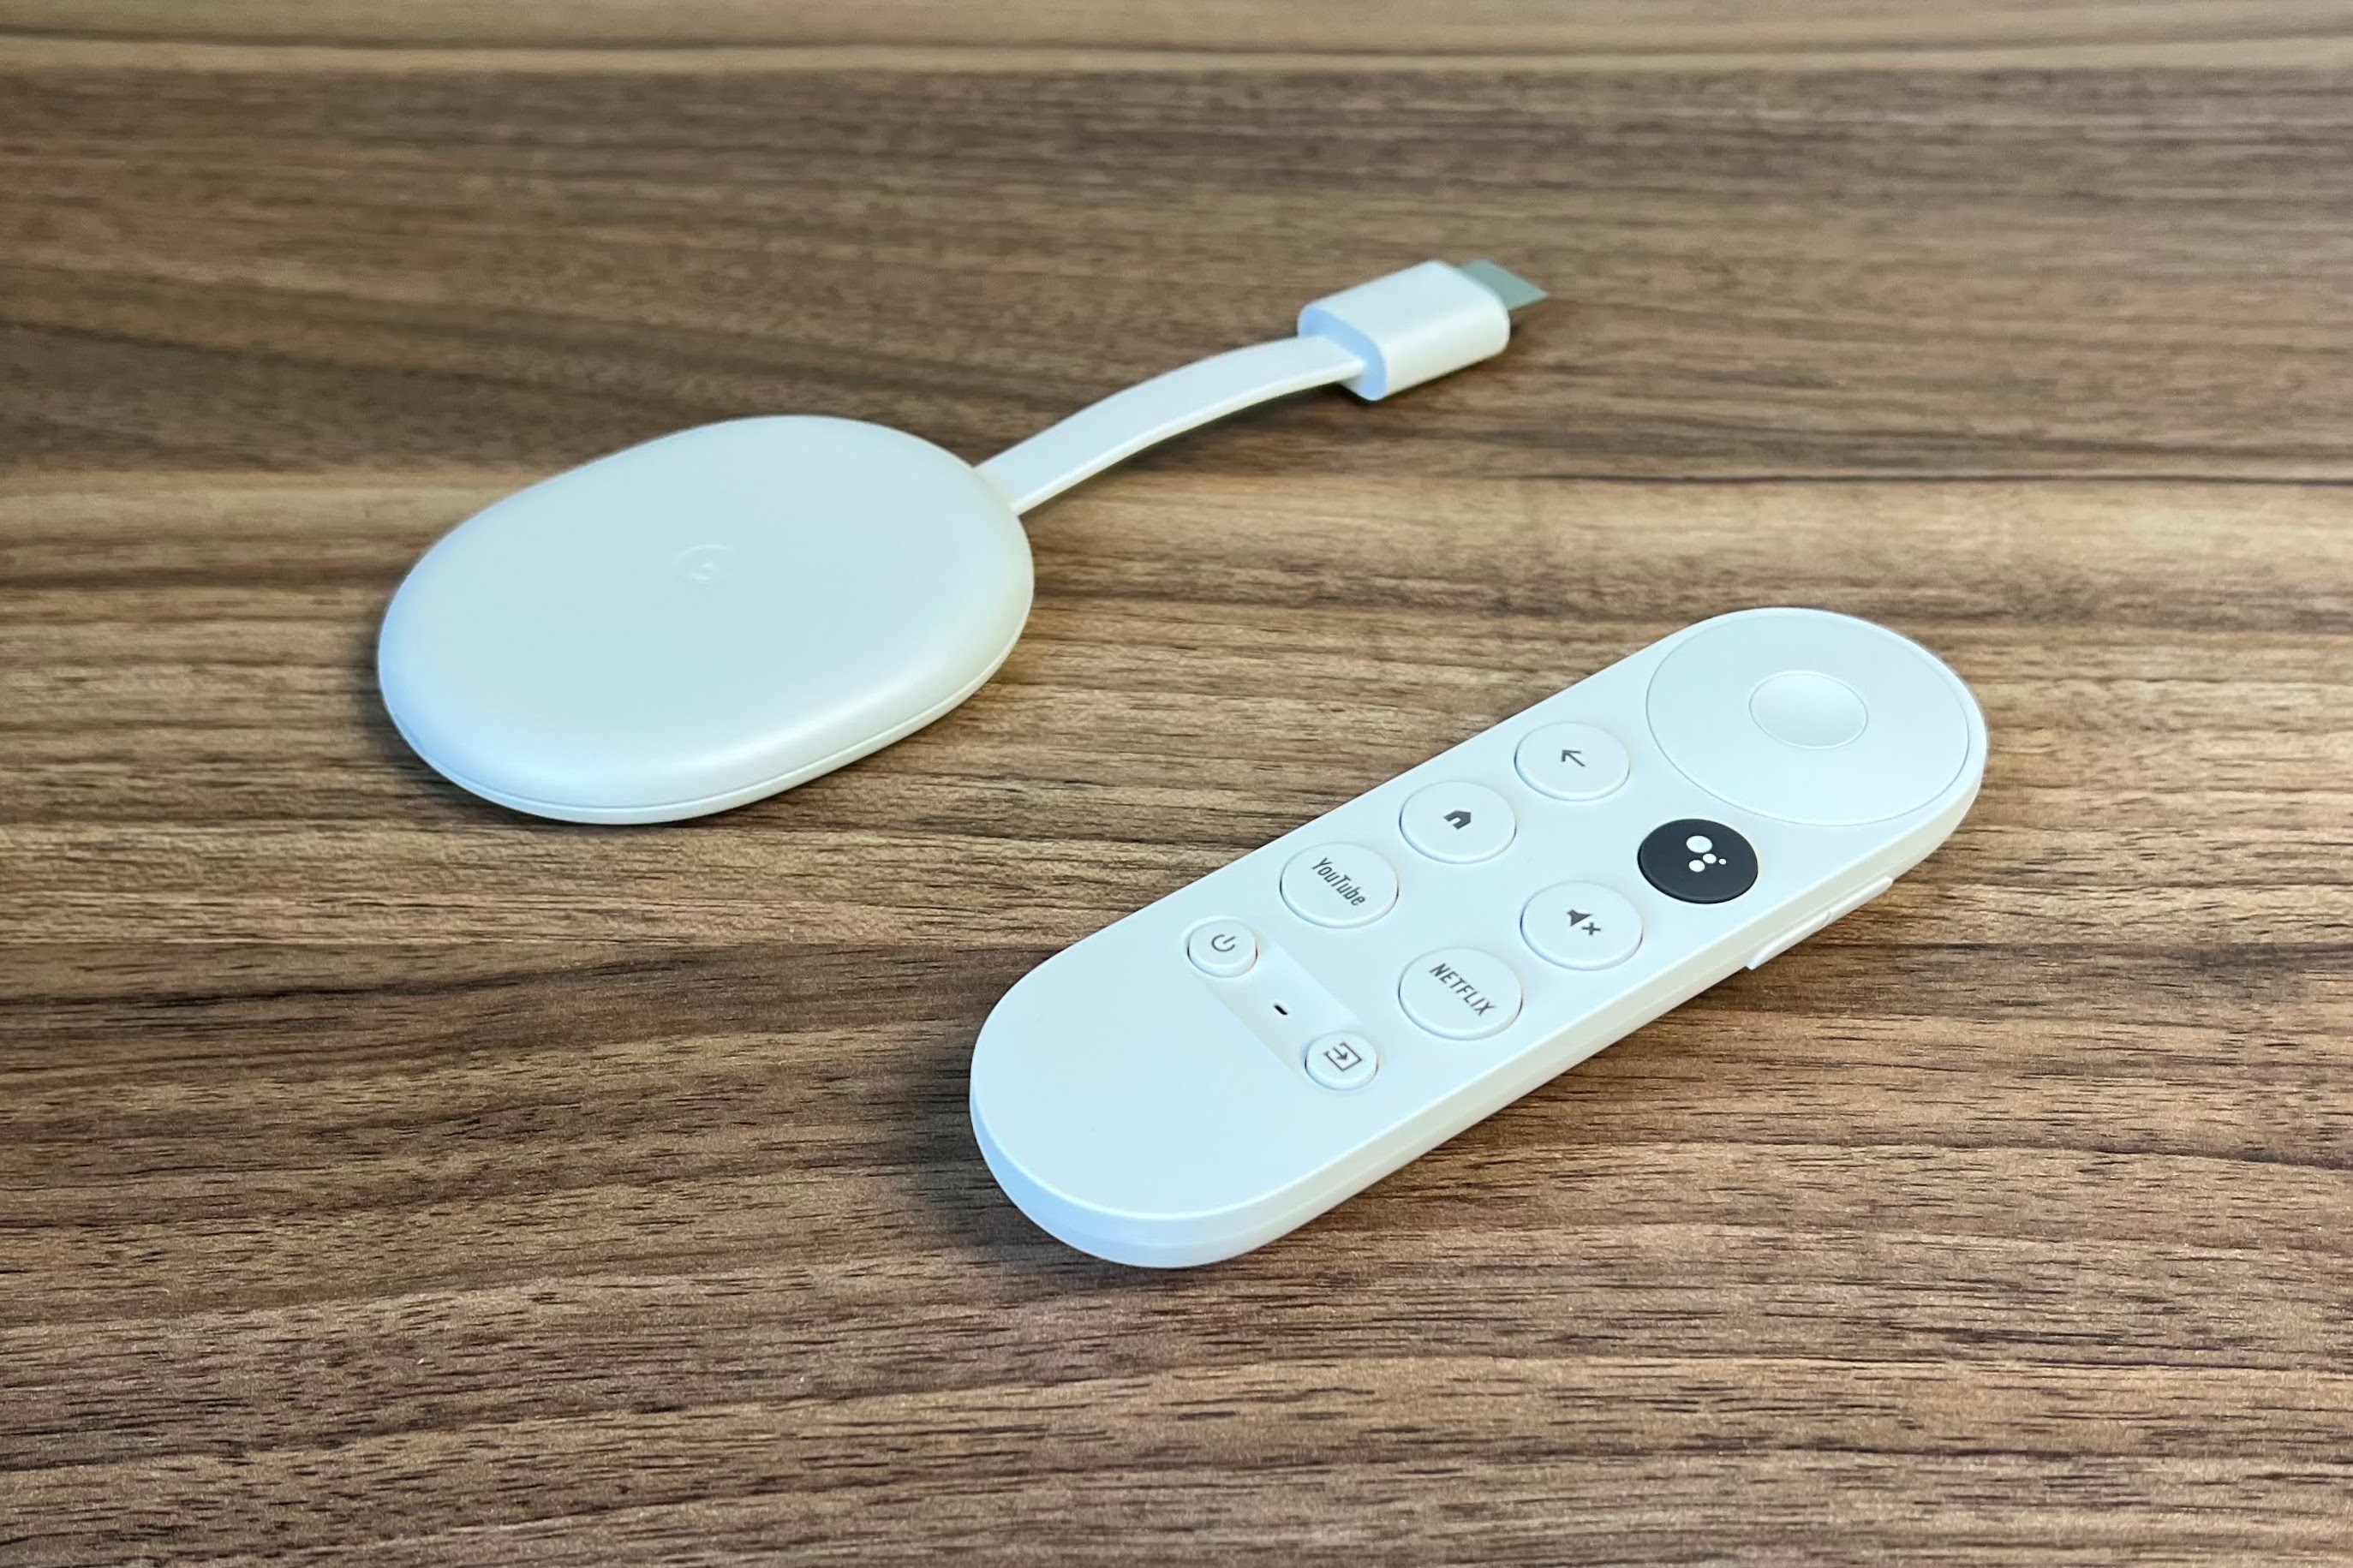 Best new streaming device: Chromecast with Google TV (HD)